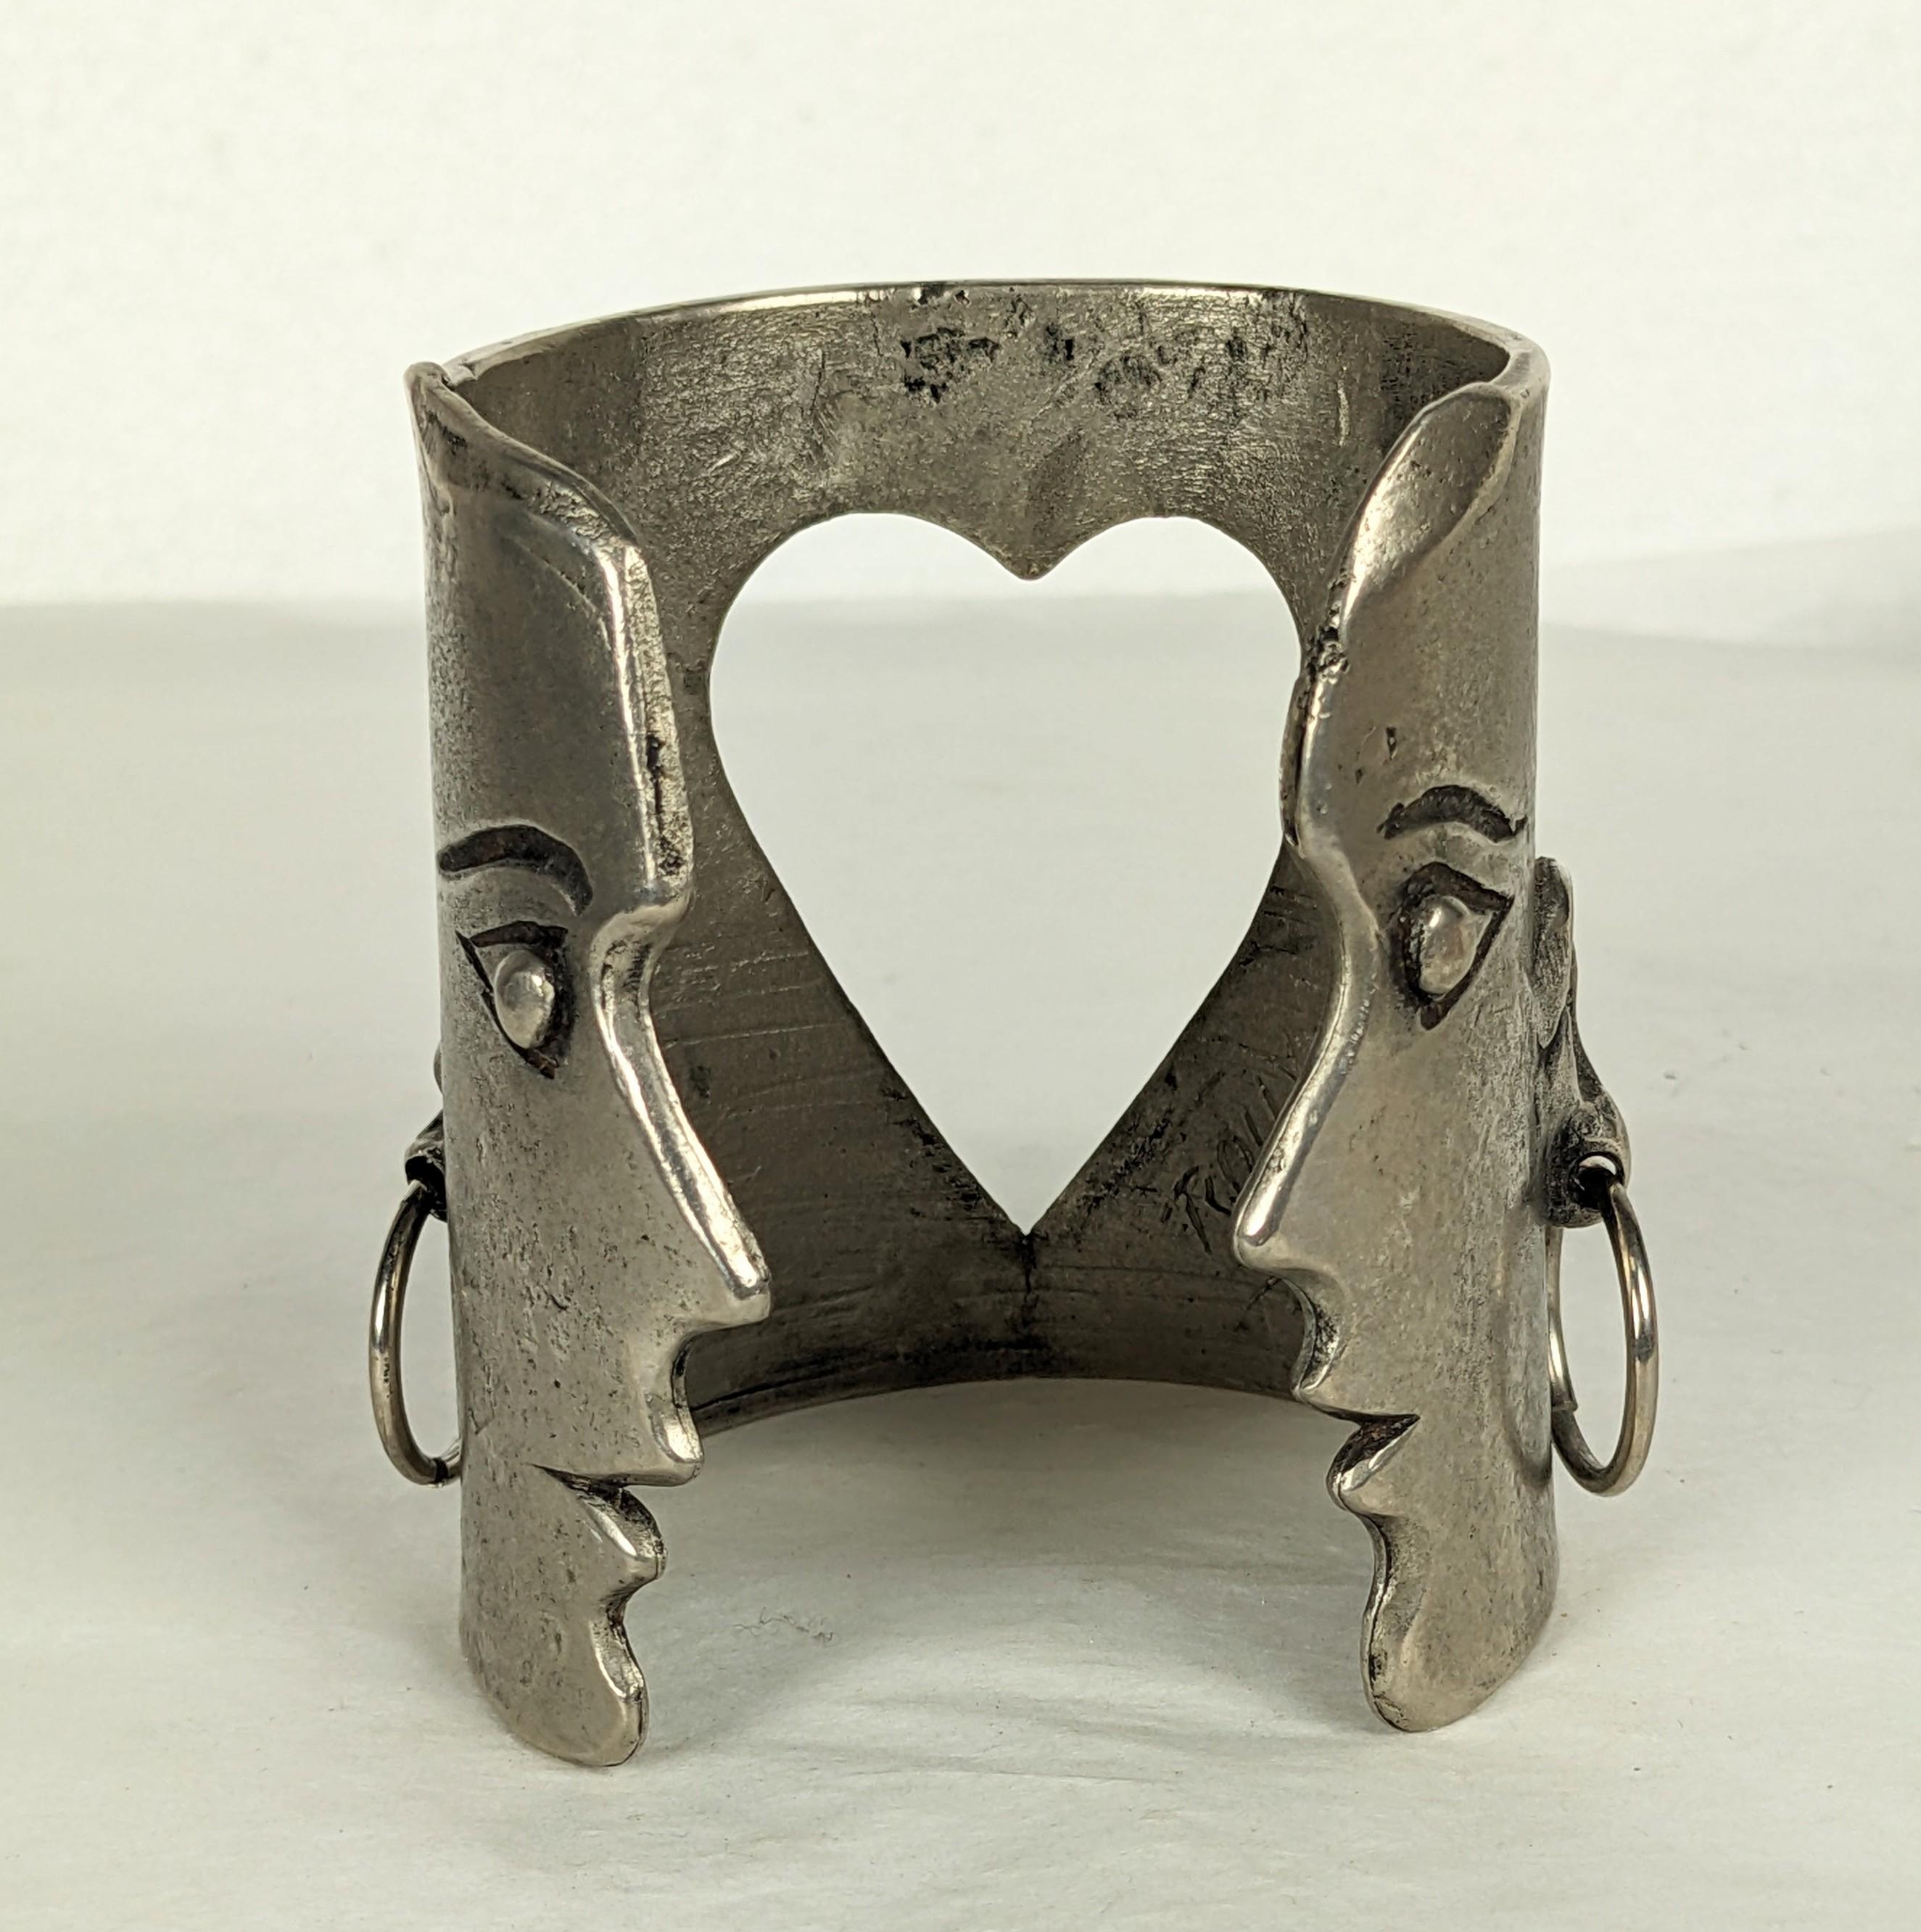 Rare Jean Charles de Castelbajac Figural Runway Cuff from the 1980's. Patinaed silvered metal created by D. Roux for Castelbajac. A double headed face motif with dangle hoop earrings and central heart cutout. 2.75 wide, length 6.5